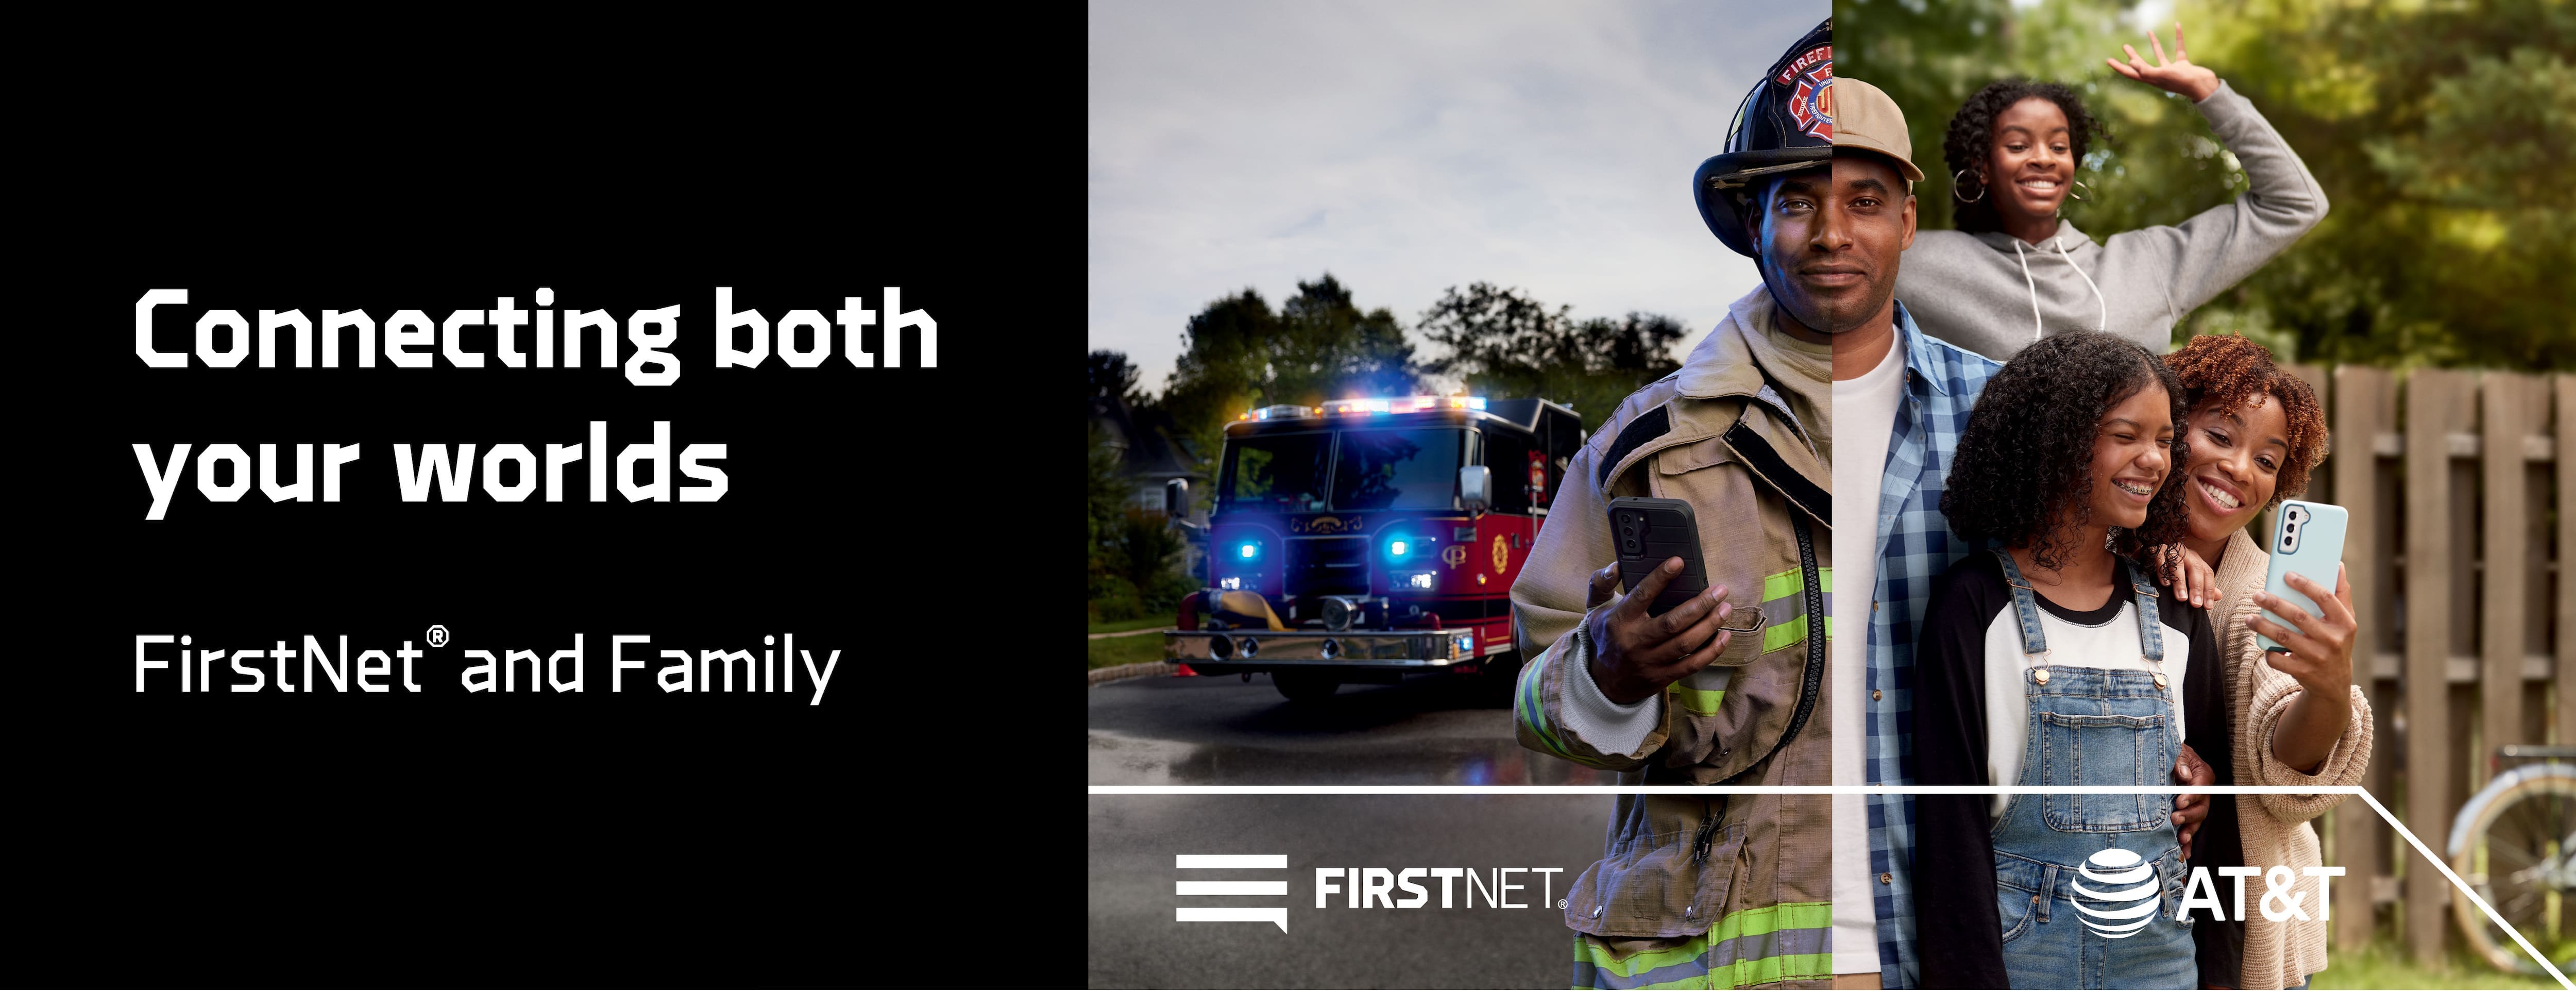 FIRSTNET AND FAMILY